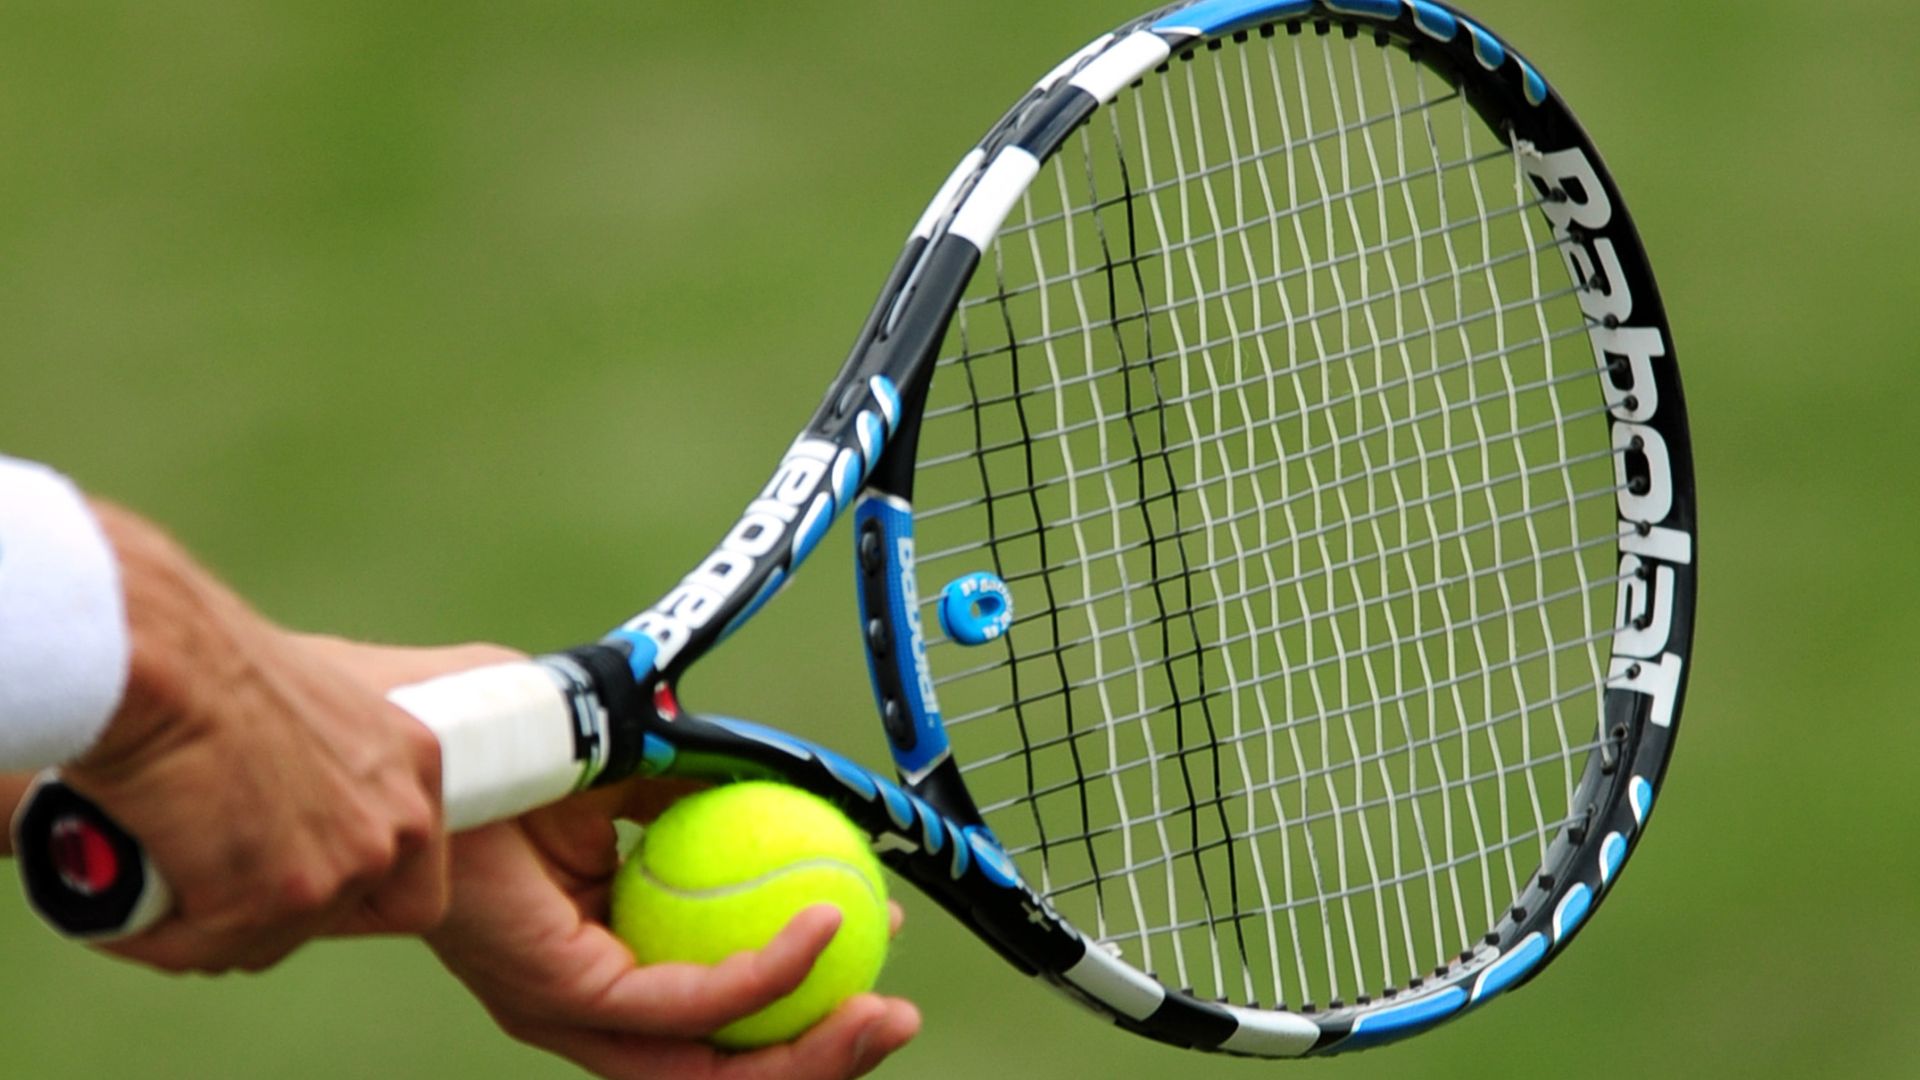 Fifty-eight-year-old wheelchair player suspended for doping